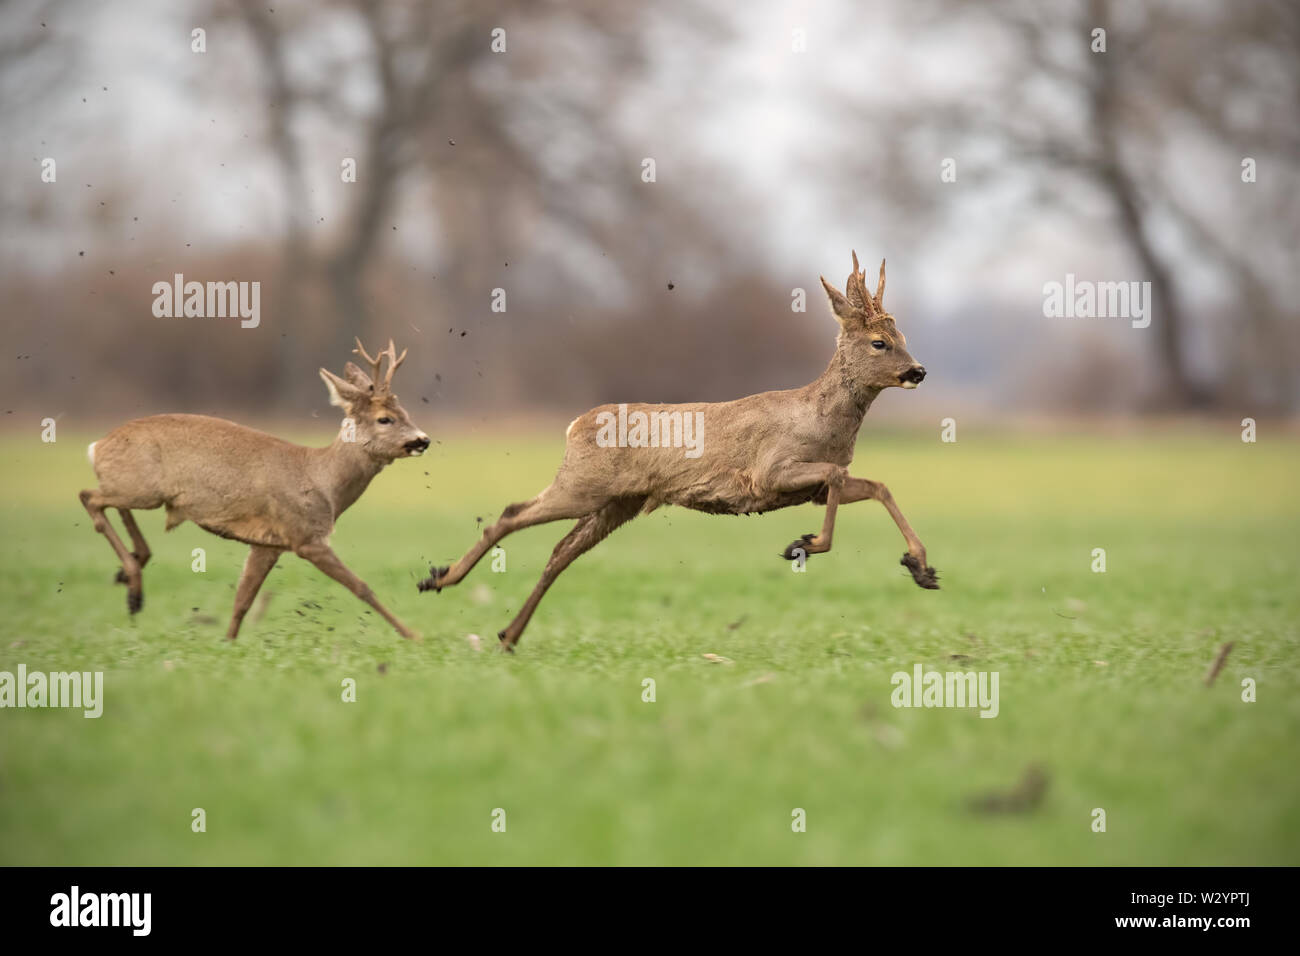 Two wild roe deer bucks chasing each other in spring nature. Stock Photo